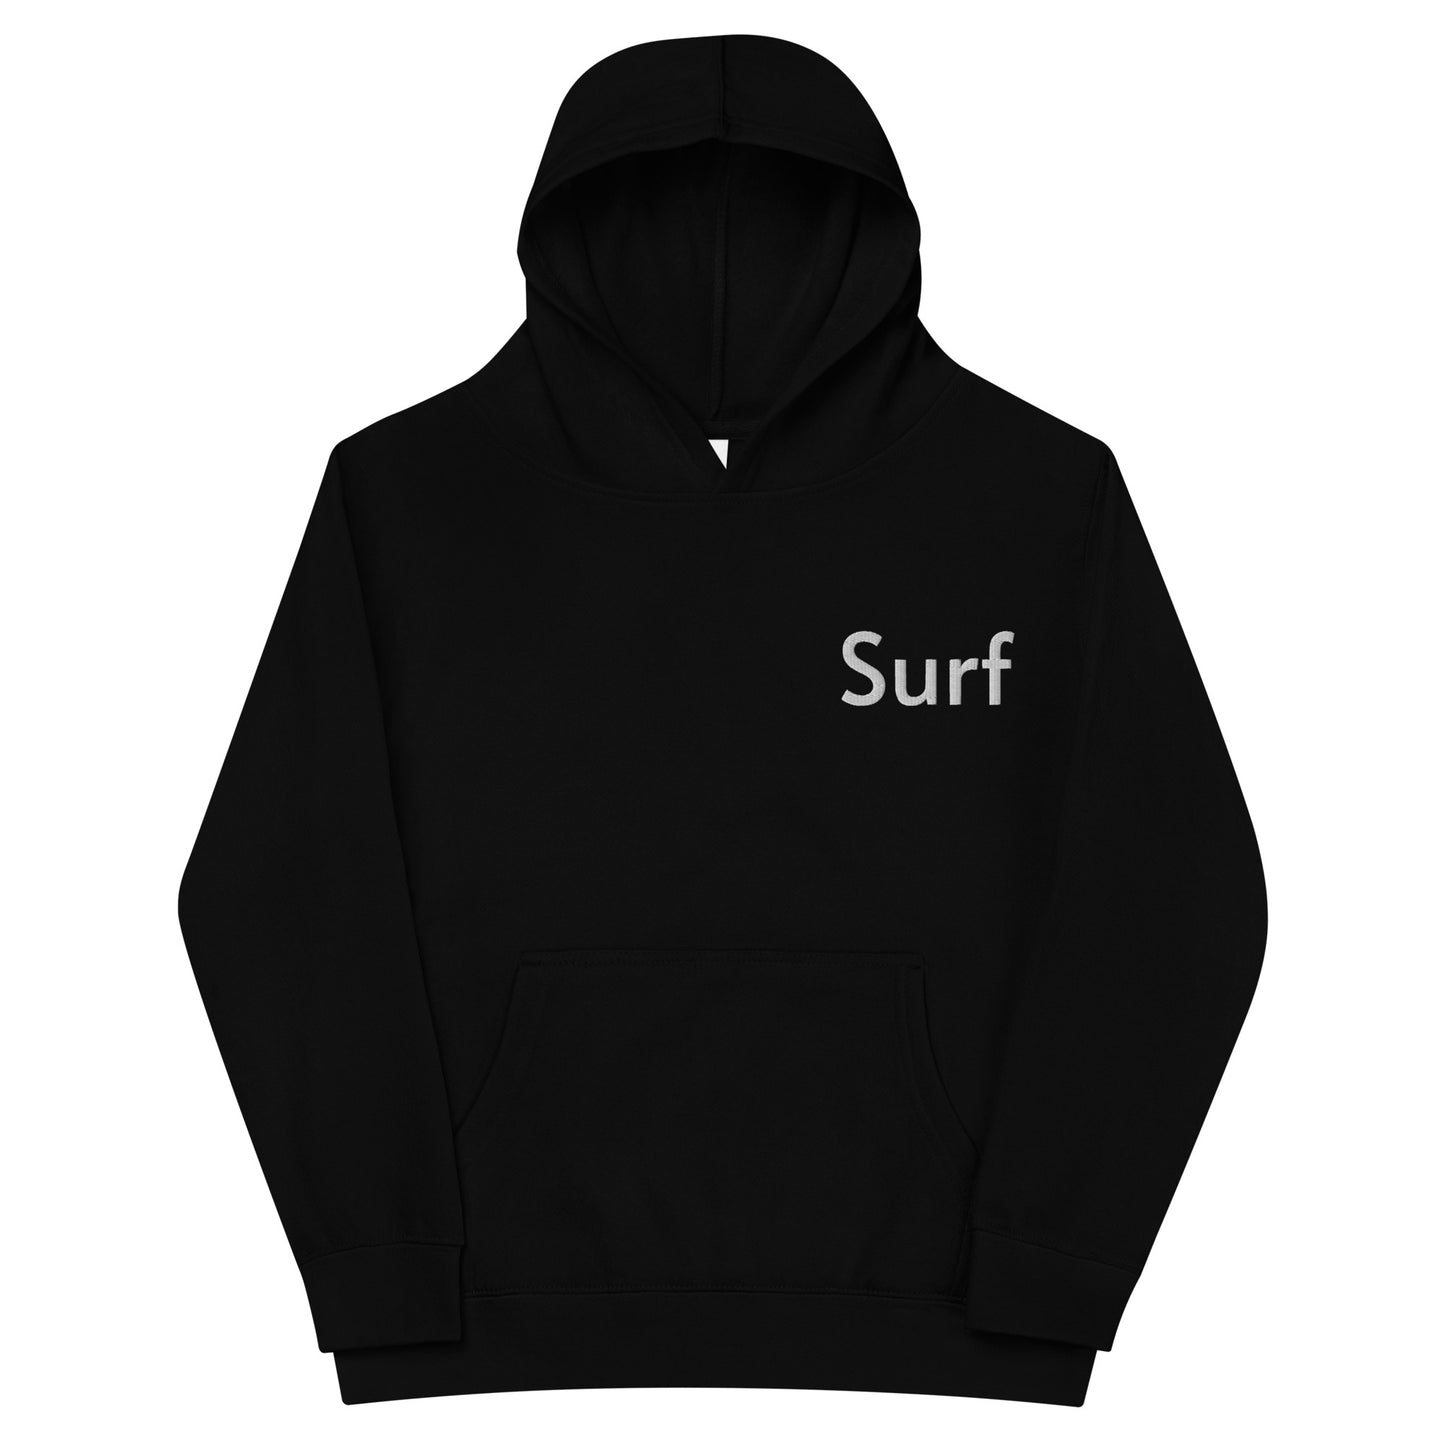 Surf embroidered hoodie